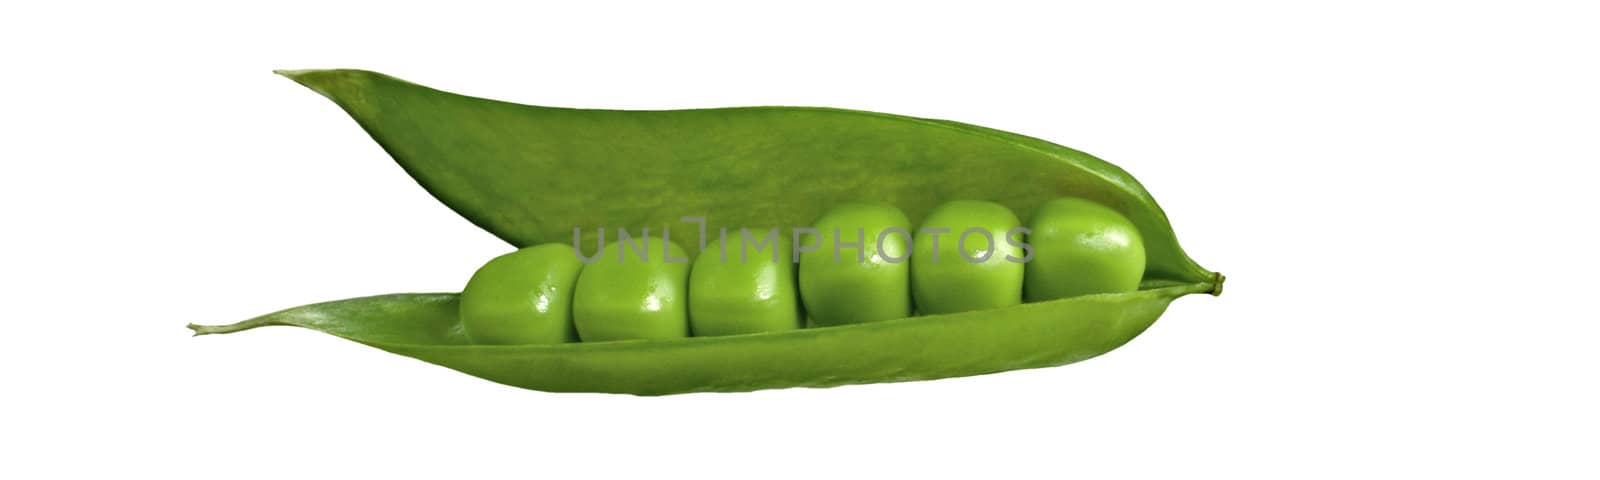 fresh green peas isolated on a white background by ozaiachin